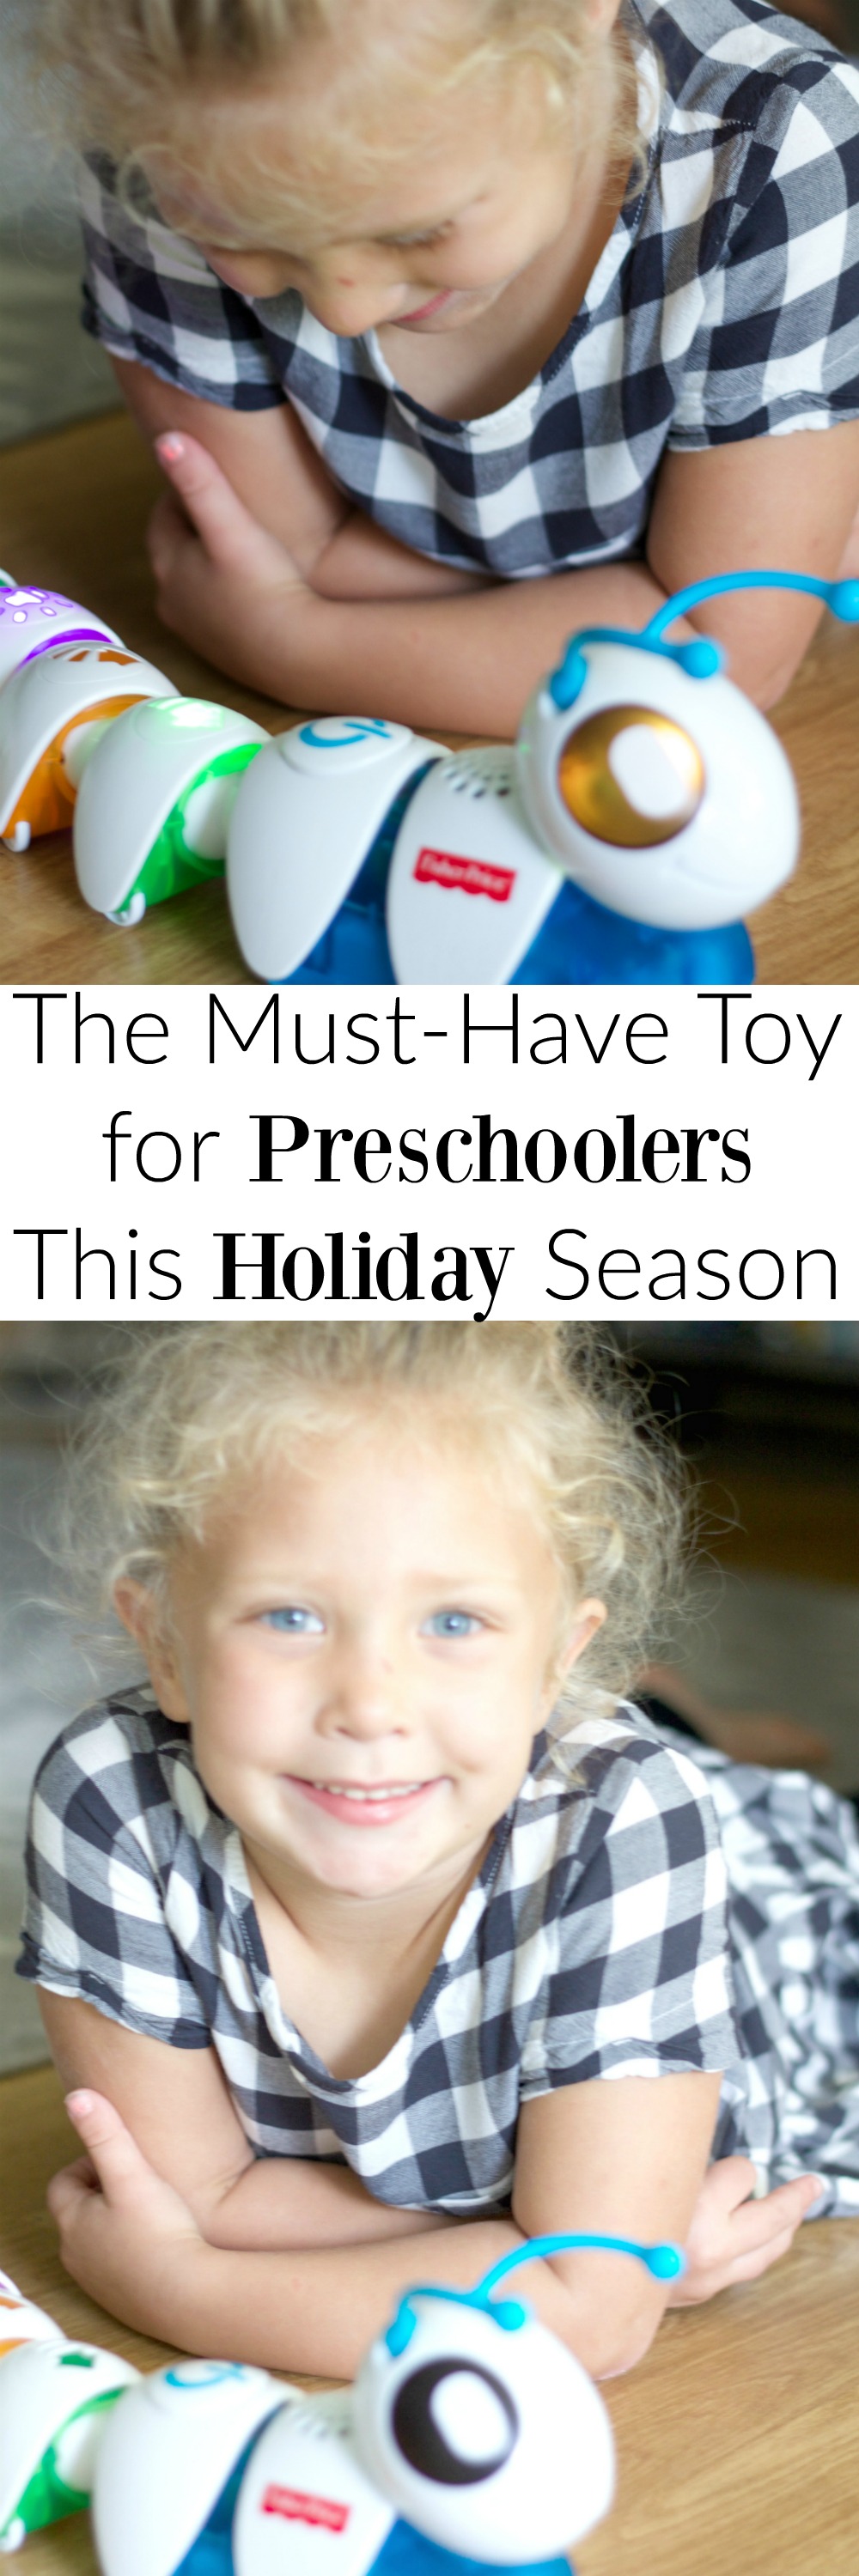 The Must-Have Toy for Preschoolers This Holiday Season